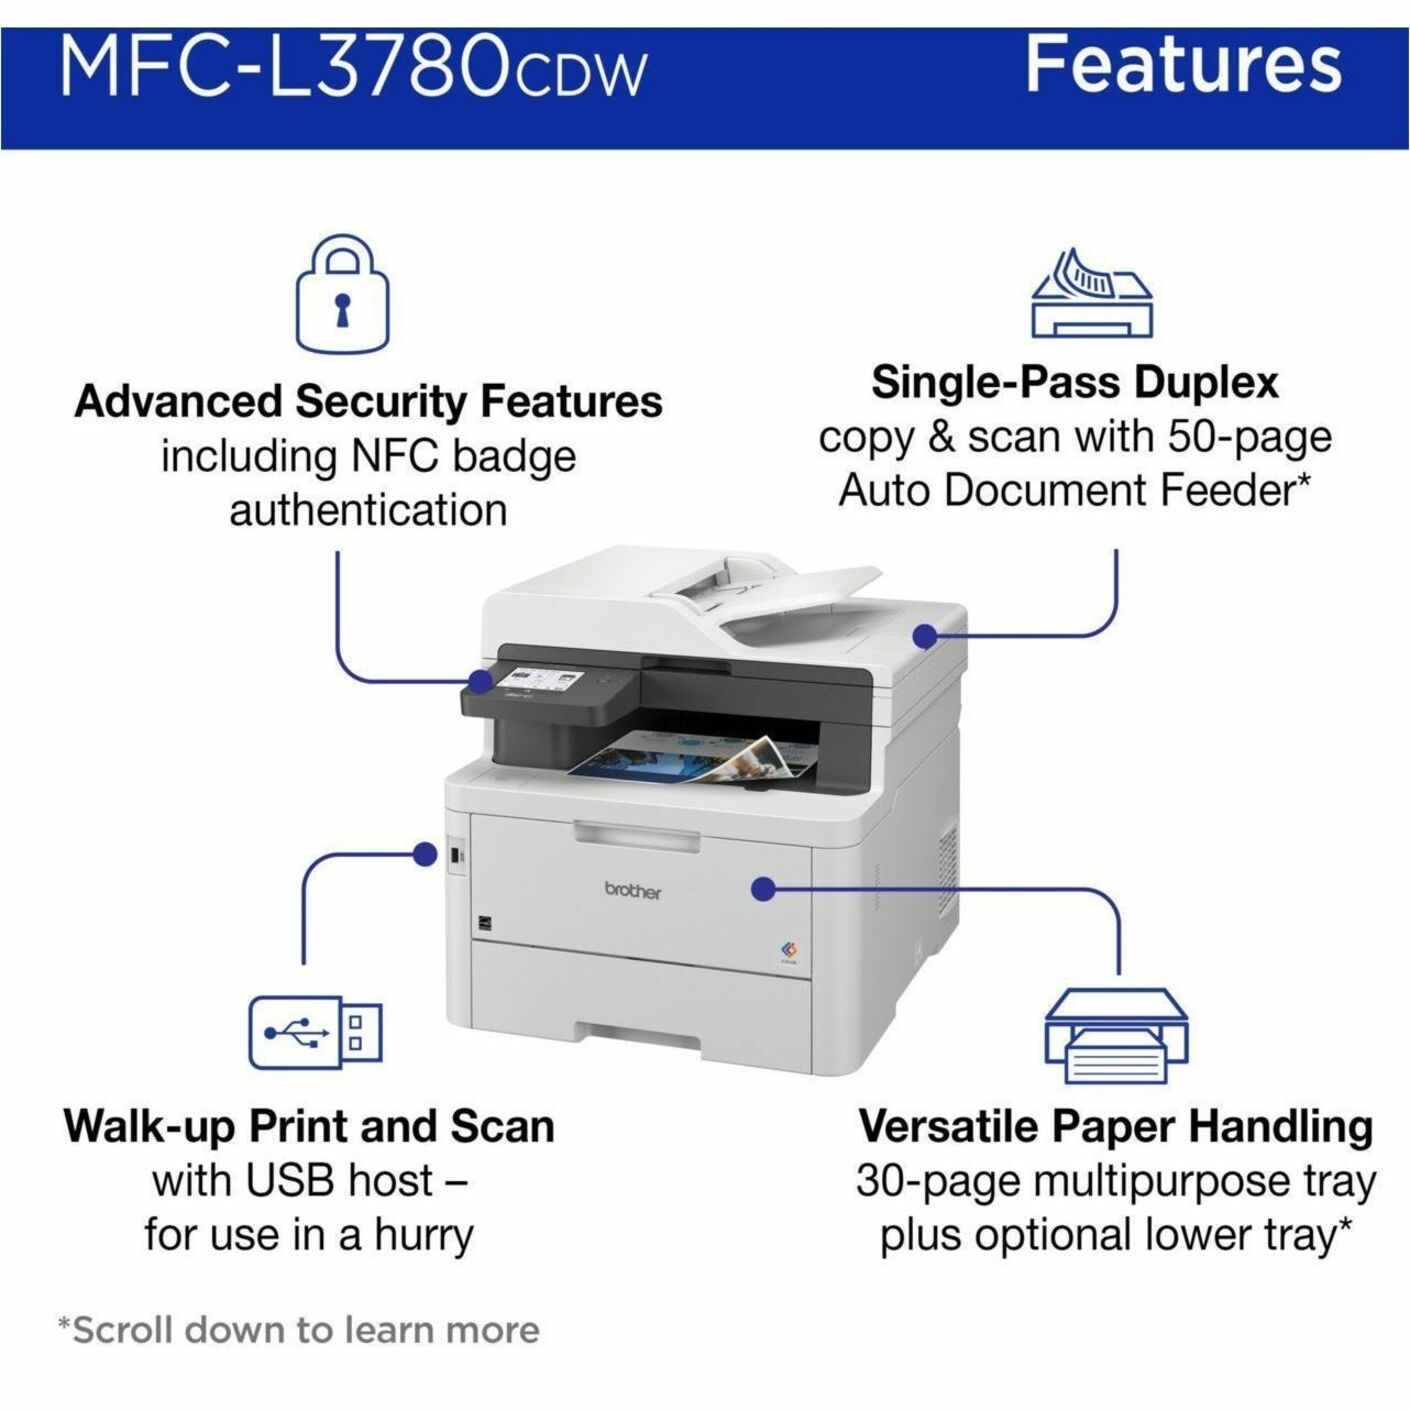 Brother MFC-L3780CDW Wireless Digital Color All-in-One Printer, Fax, Copier, Scanner, USB, 3.50" Touchscreen, Gigabit Ethernet, Wireless LAN, NFC